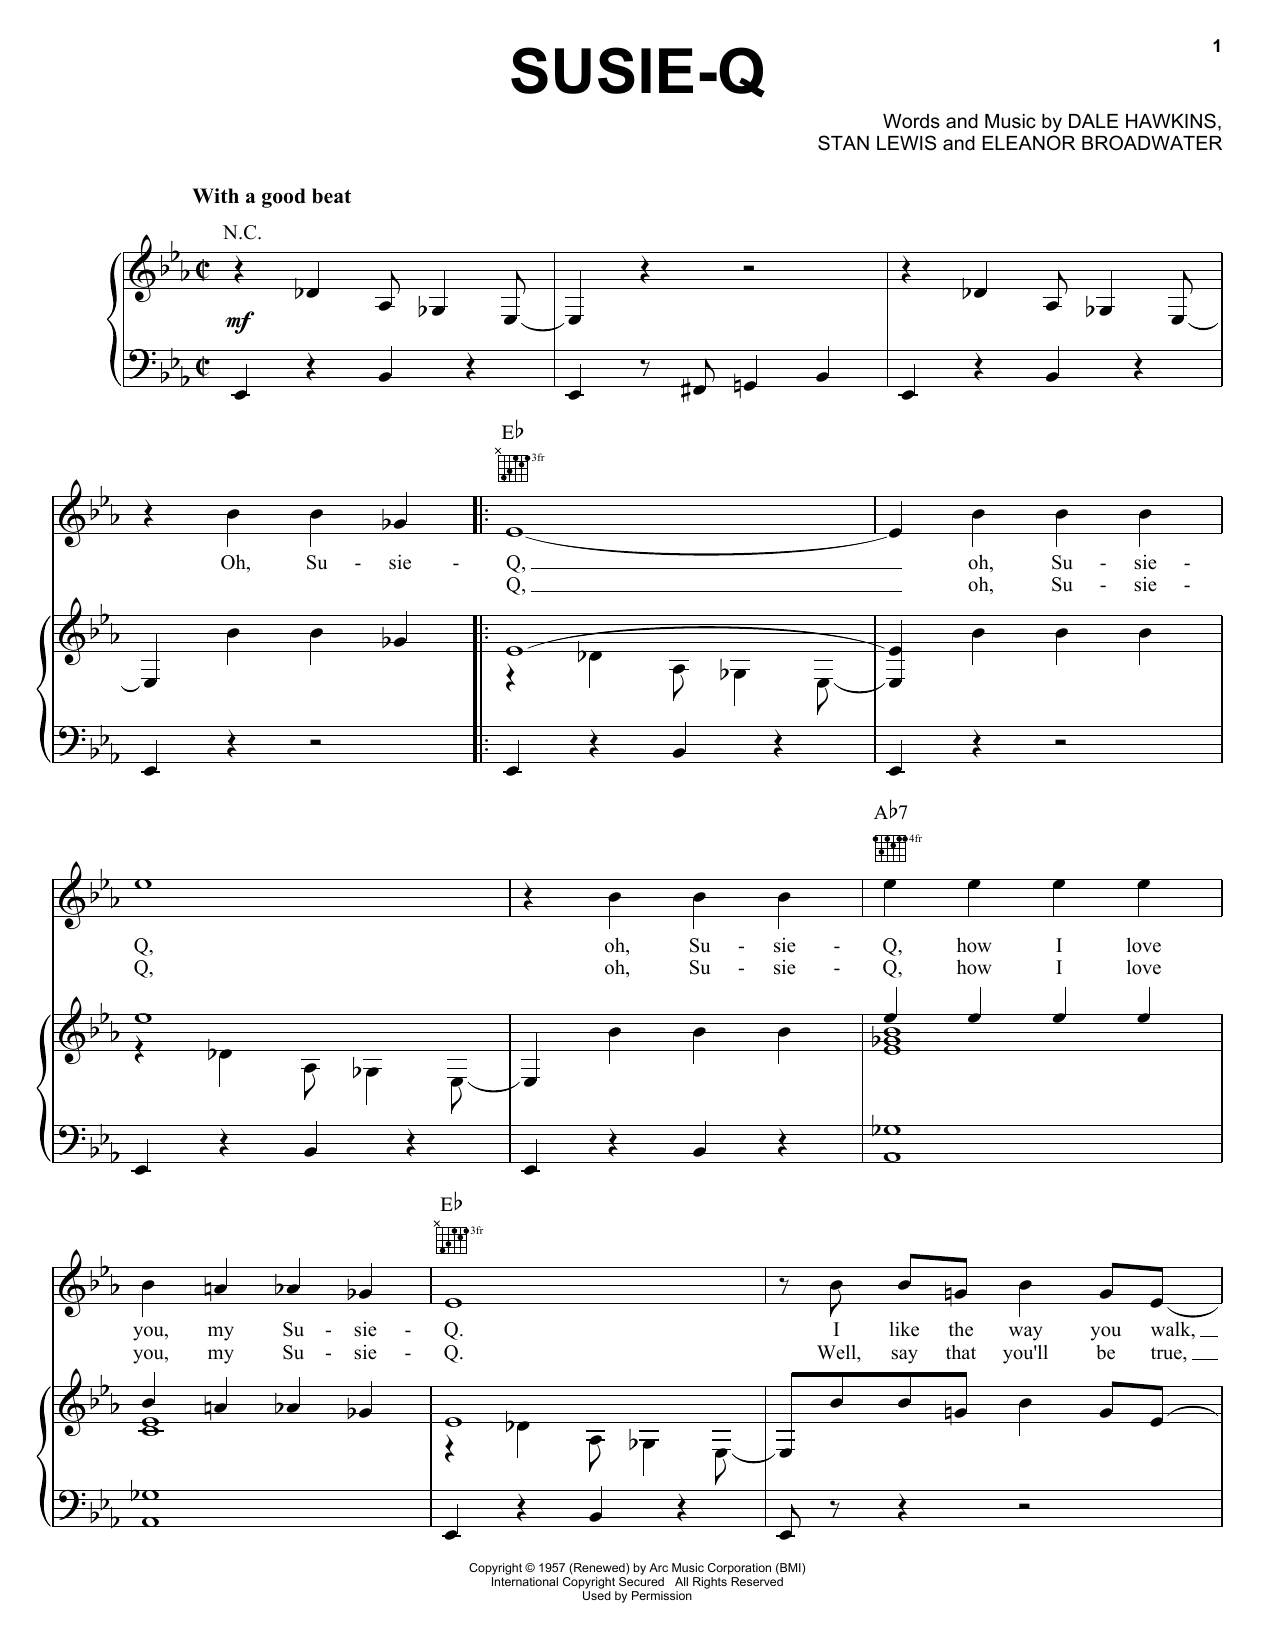 Creedence Clearwater Revival Susie-Q sheet music notes printable PDF score